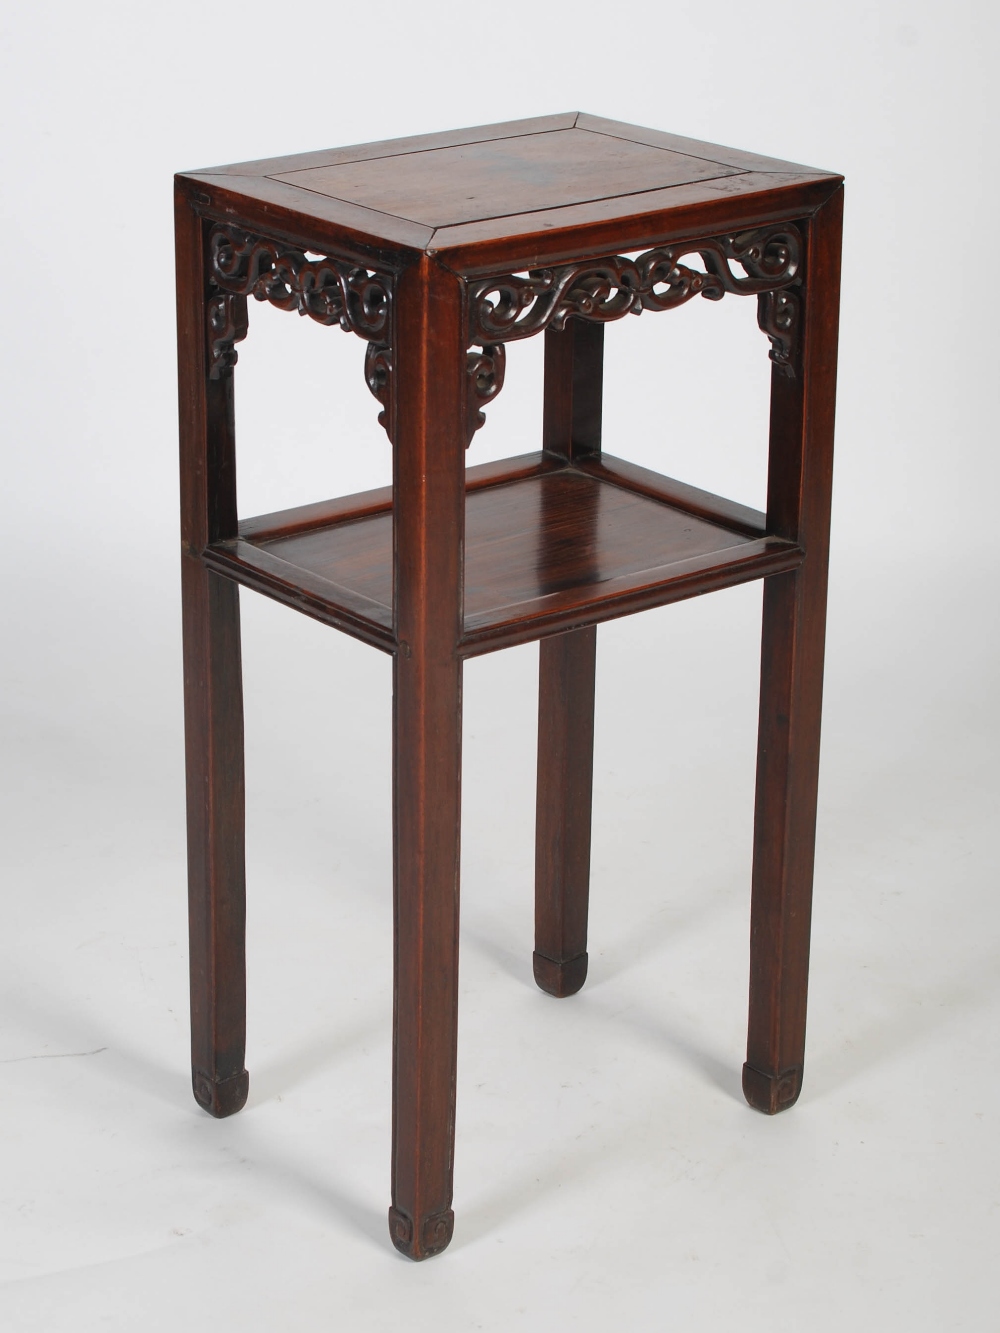 A Chinese darkwood urn stand, Qing Dynasty, the plain top with a carved scrolling frieze with